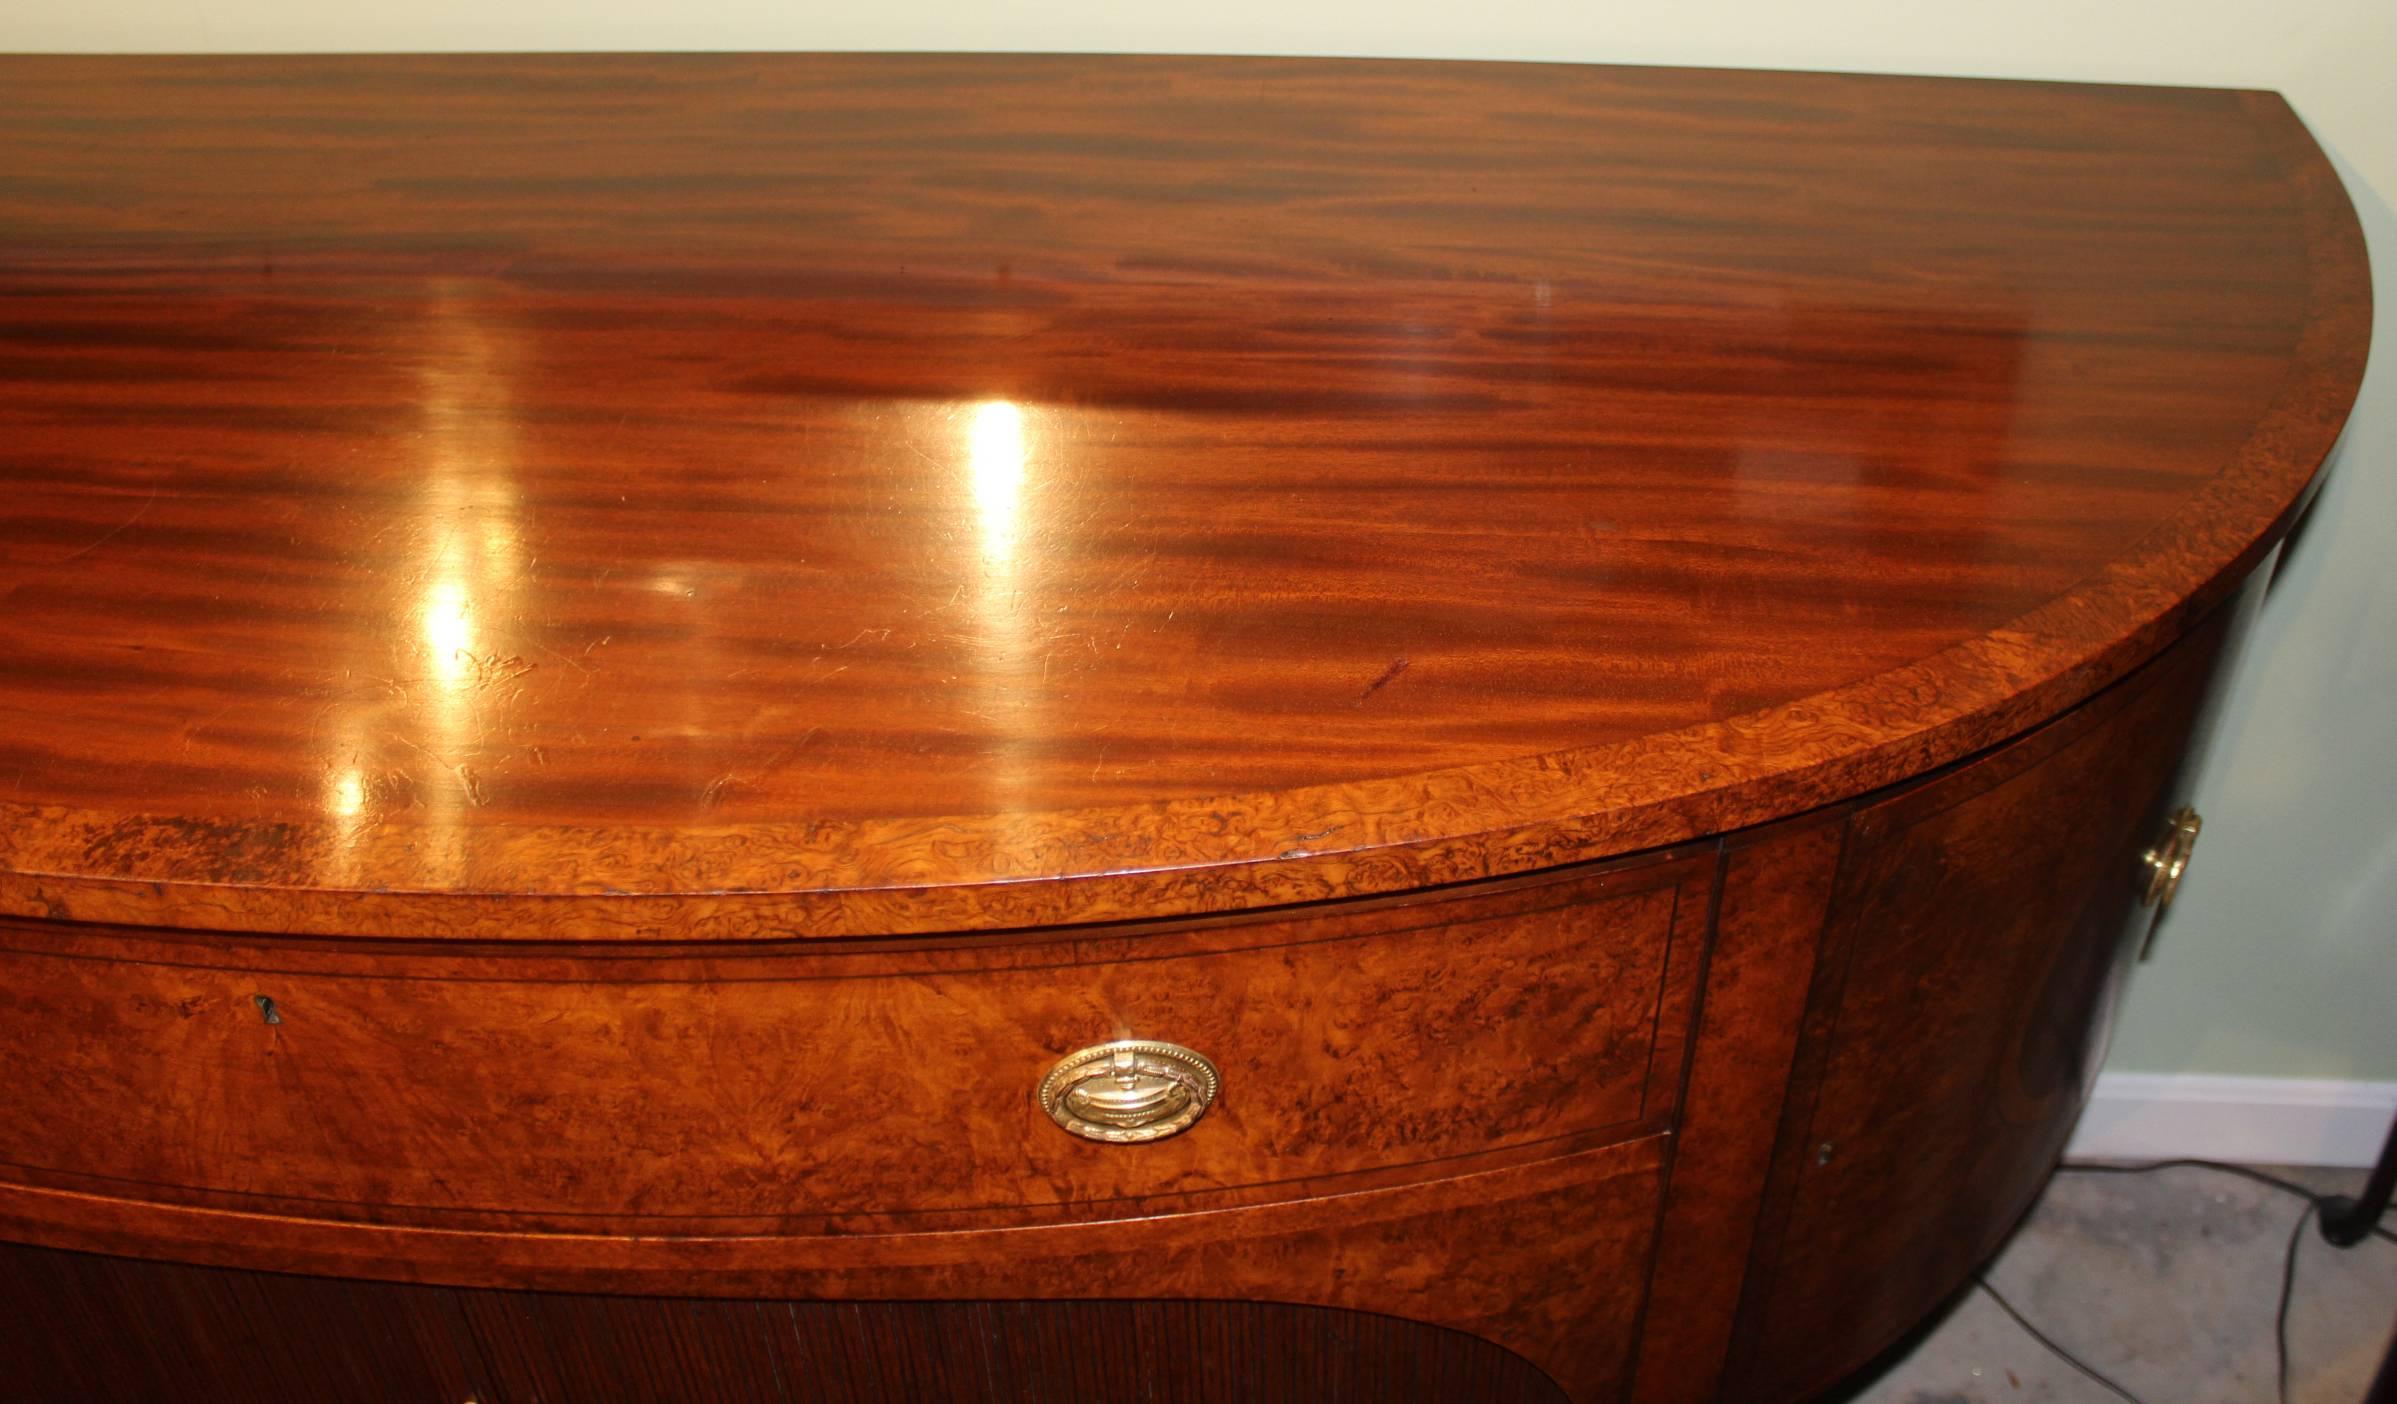 American Demilune Mahogany Sideboard or Server with Burled Walnut and Tambour Doors